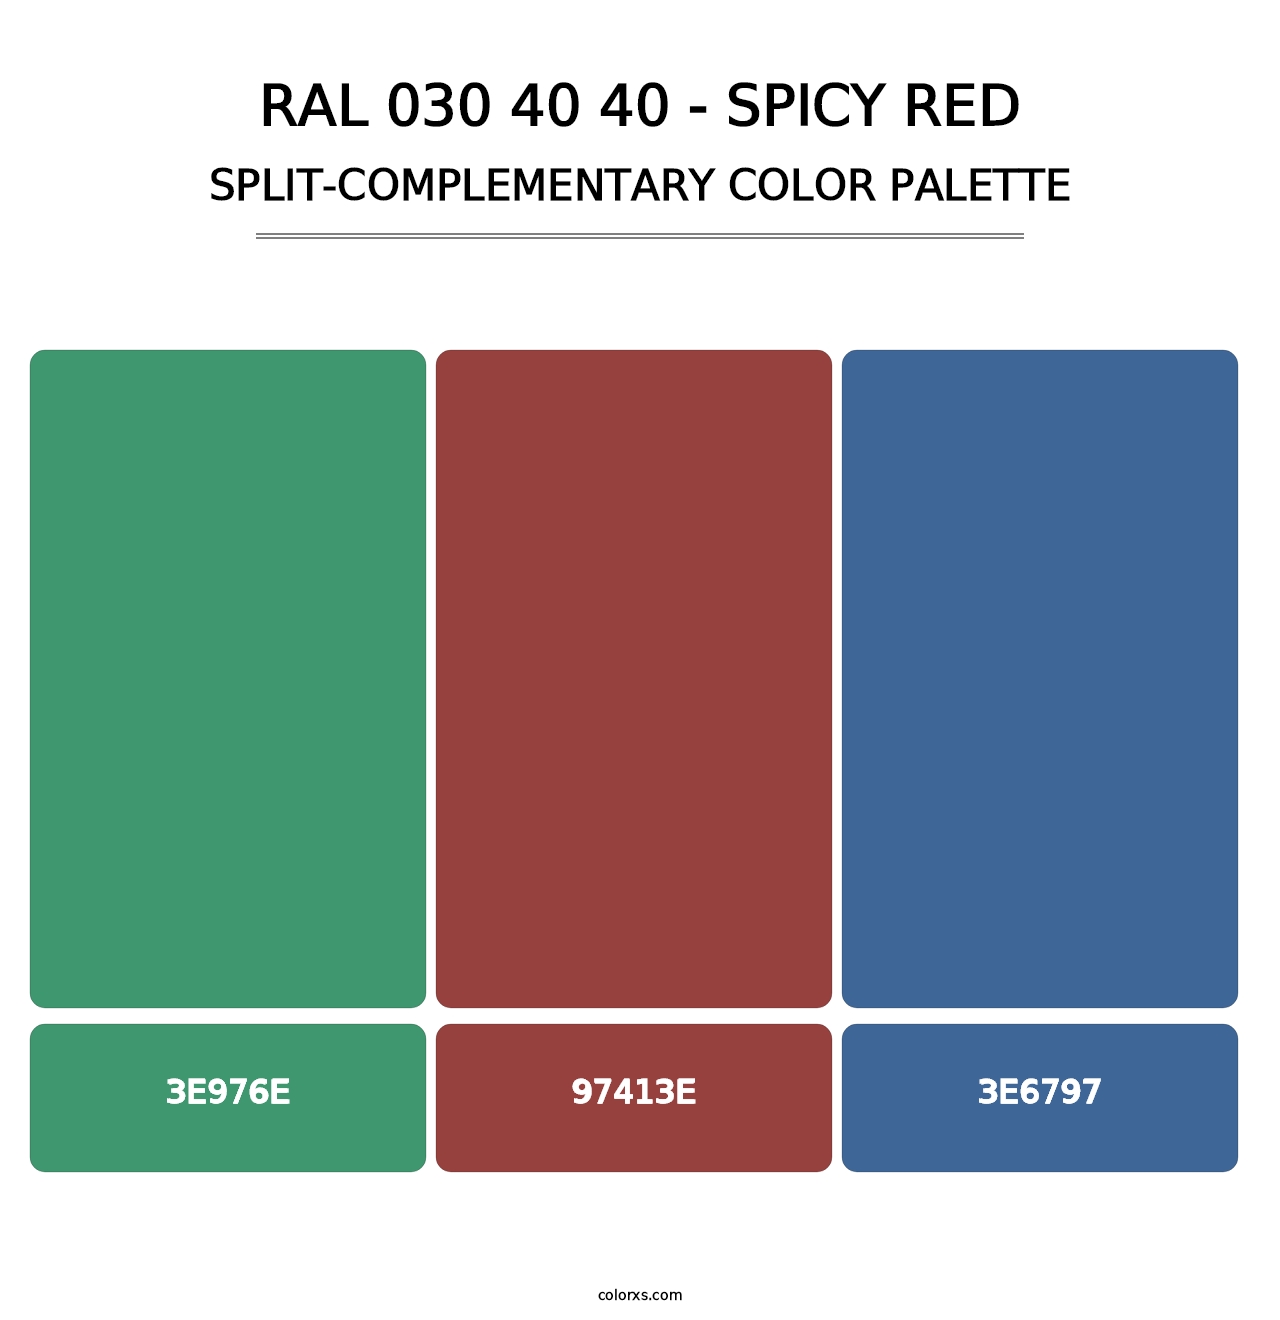 RAL 030 40 40 - Spicy Red - Split-Complementary Color Palette